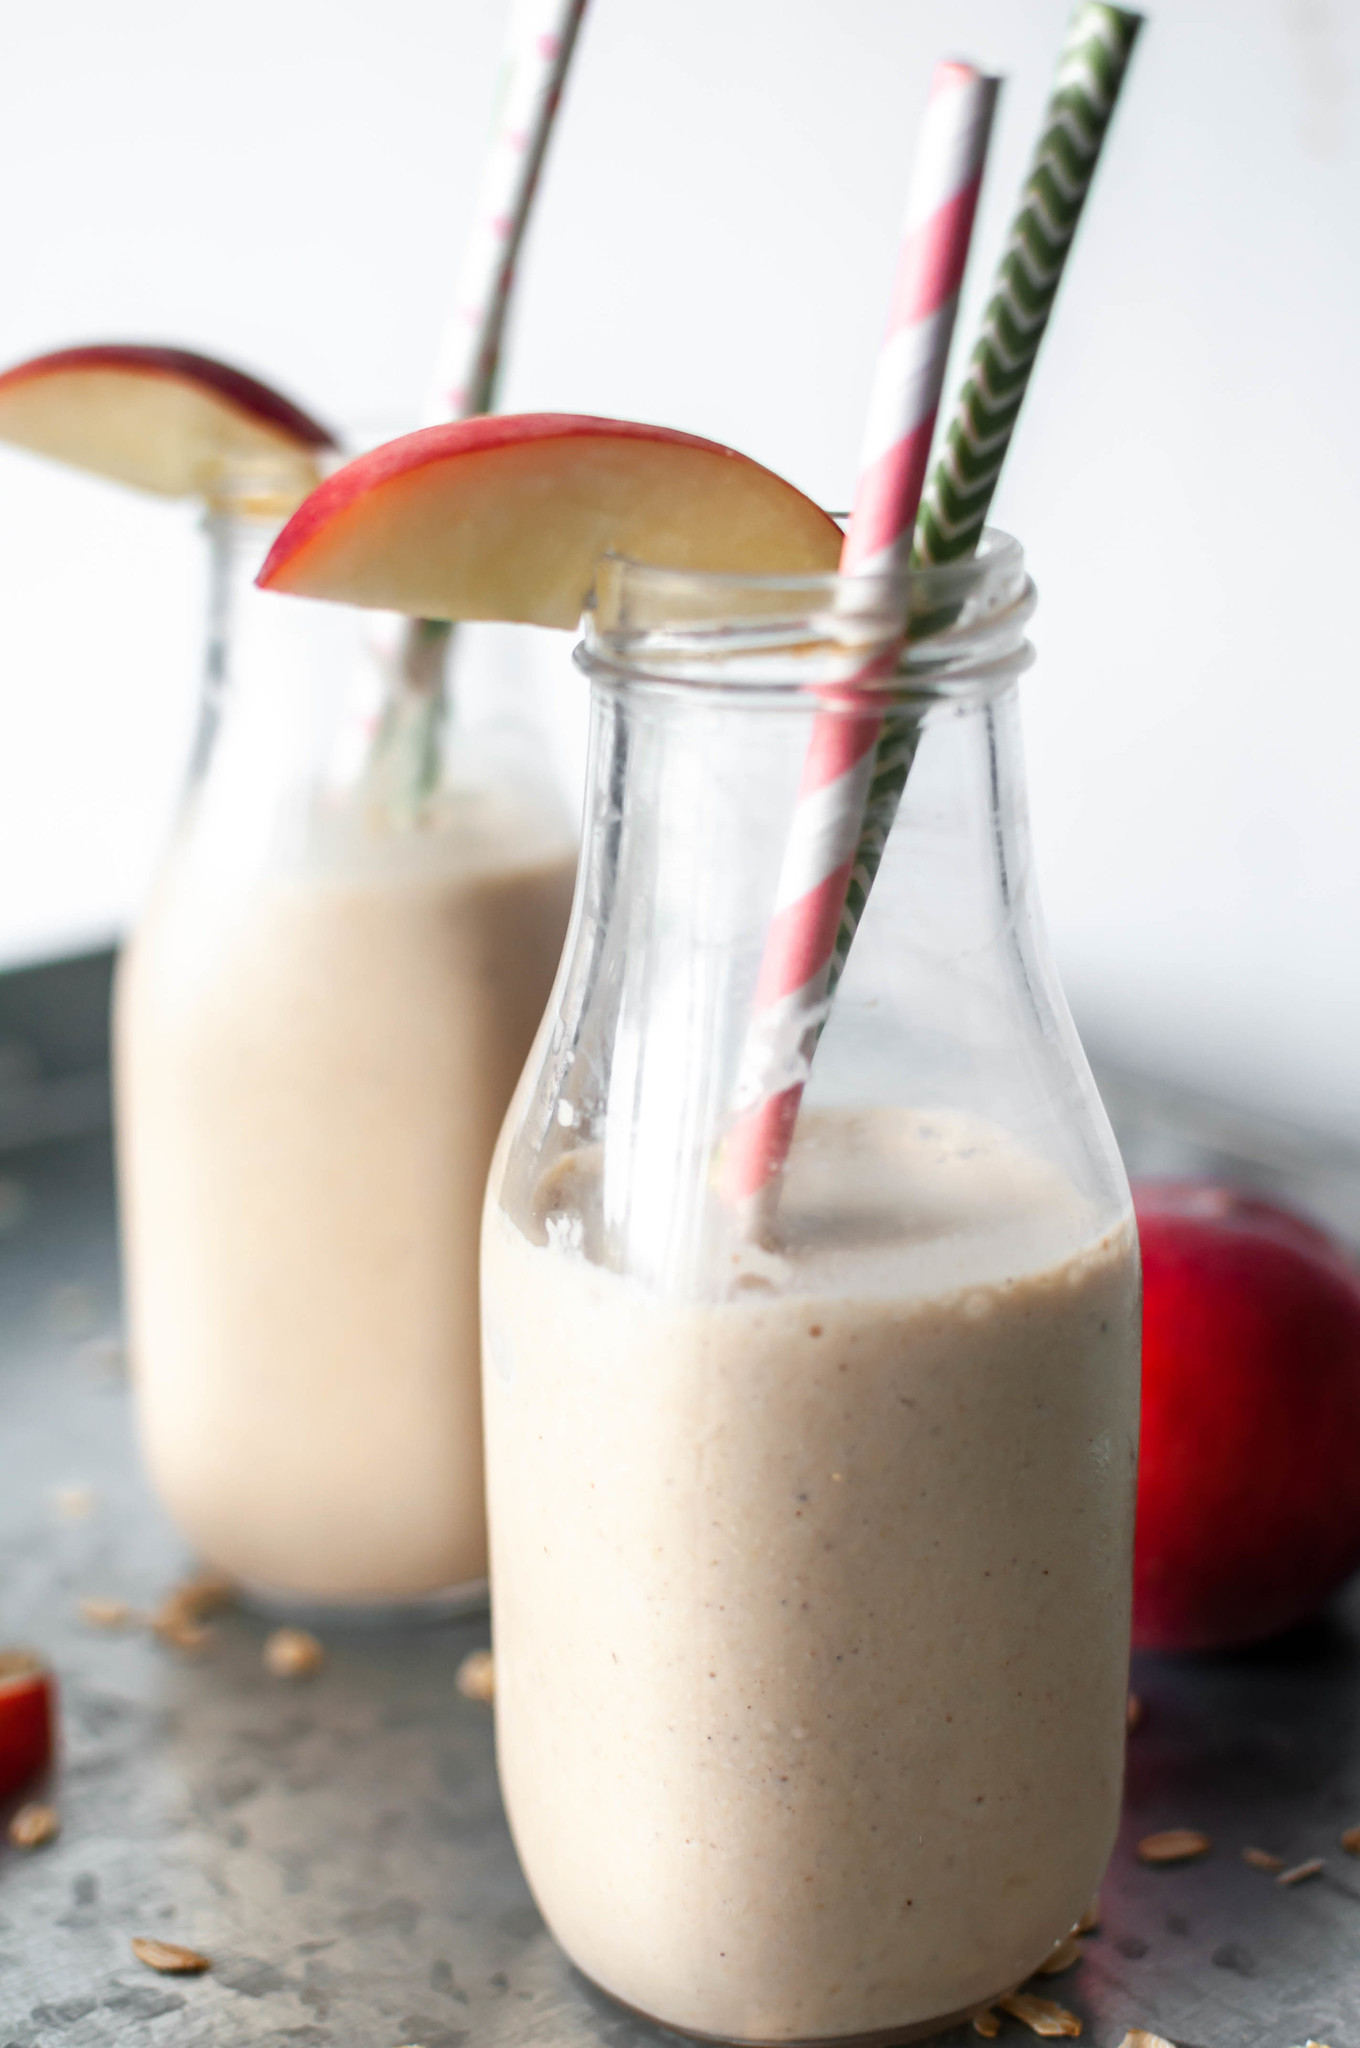 Peach Cobbler Smoothies bring all the sweet, crumbly dessert vibes to your breakfast. Packed with sweet peaches, oats, cinnamon and vanilla, it will taste like dessert in a glass.